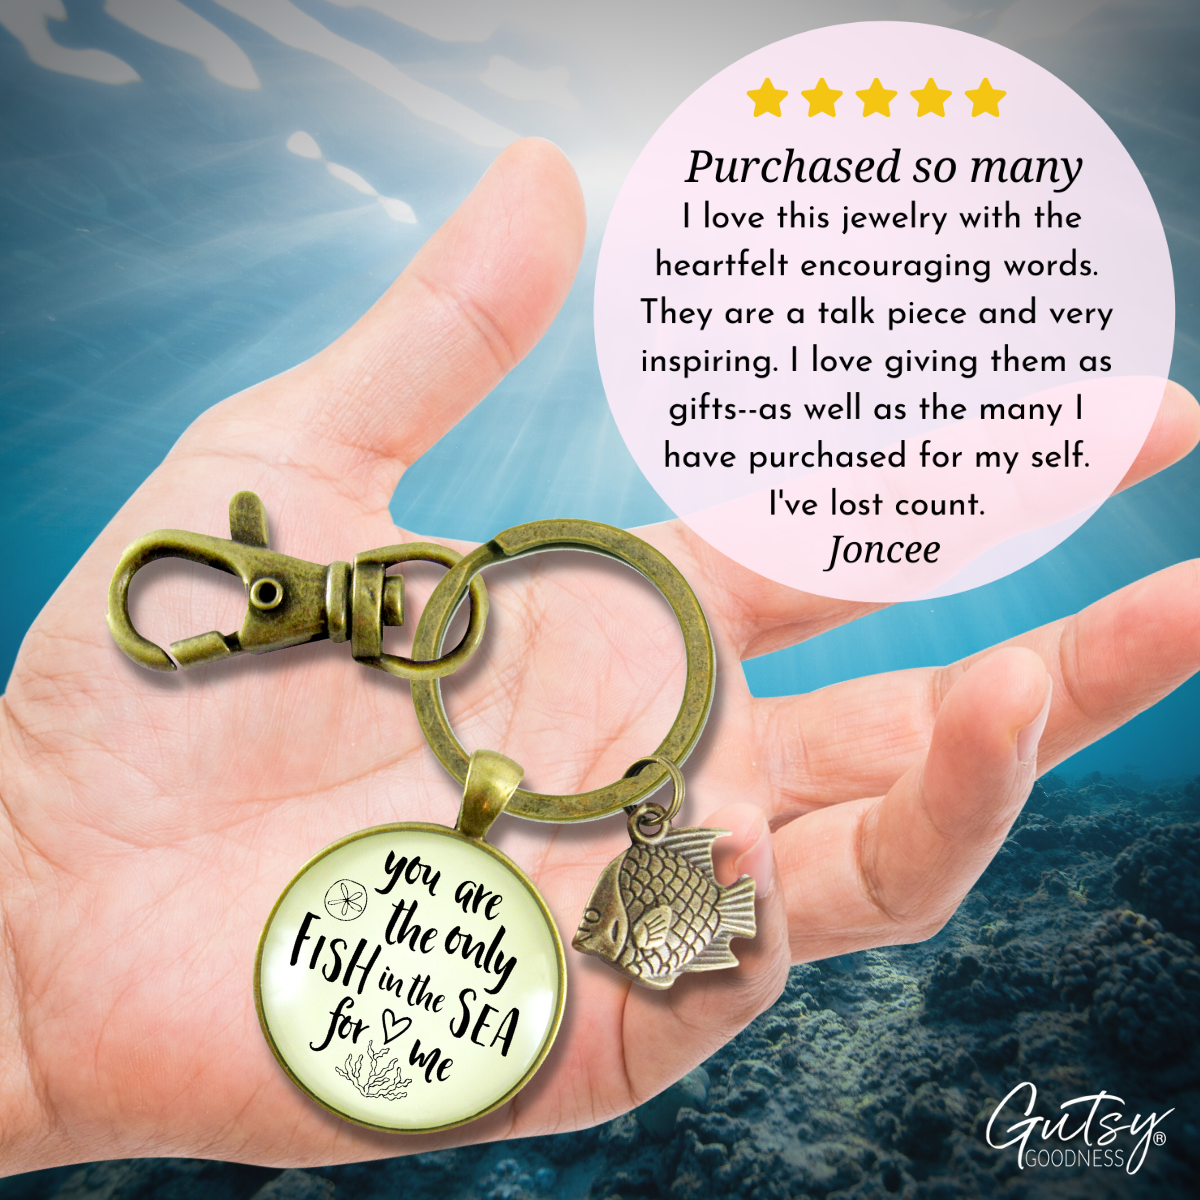 Fishing Couples Keychain For Men You Are The Only Fish in the Sea Love Quote Ocean Gift - Gutsy Goodness Handmade Jewelry;Fishing Couples Keychain For Men You Are The Only Fish In The Sea Love Quote Ocean Gift - Gutsy Goodness Handmade Jewelry Gifts